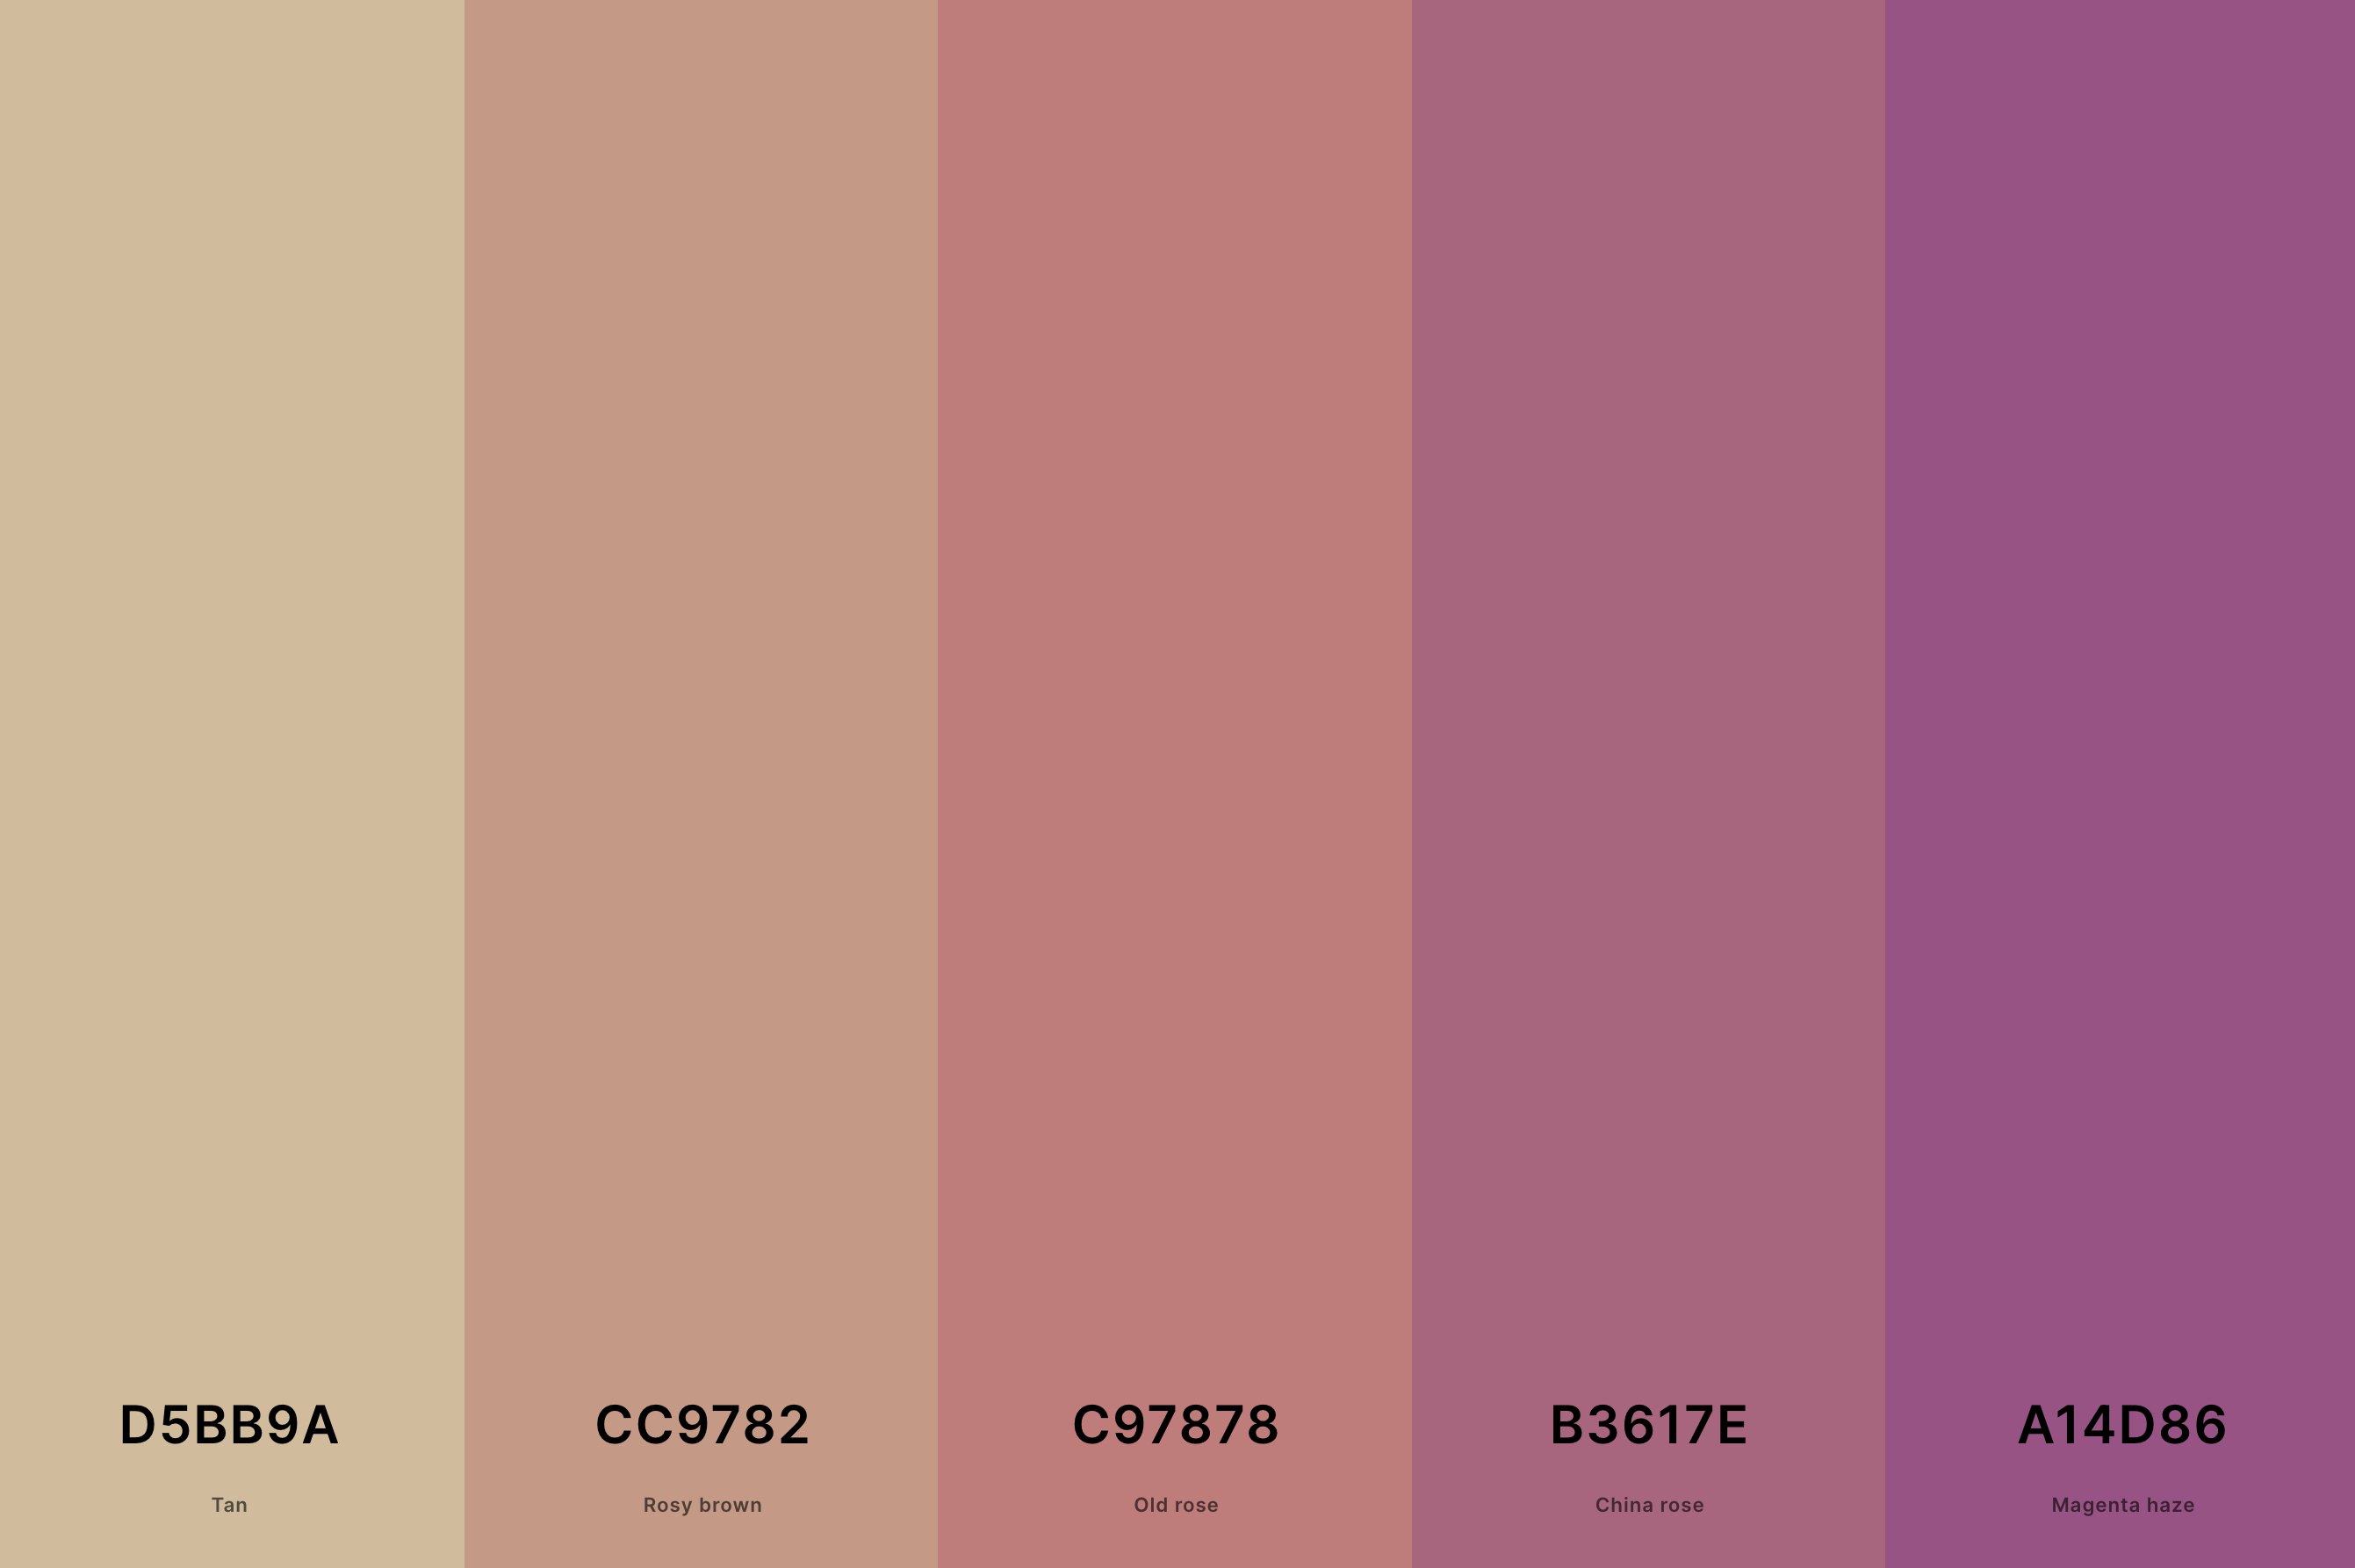 17. Warm Tan Color Palette Color Palette with Tan (Hex #D5BB9A) + Rosy Brown (Hex #CC9782) + Old Rose (Hex #C97878) + China Rose (Hex #B3617E) + Magenta Haze (Hex #A14D86) Color Palette with Hex Codes